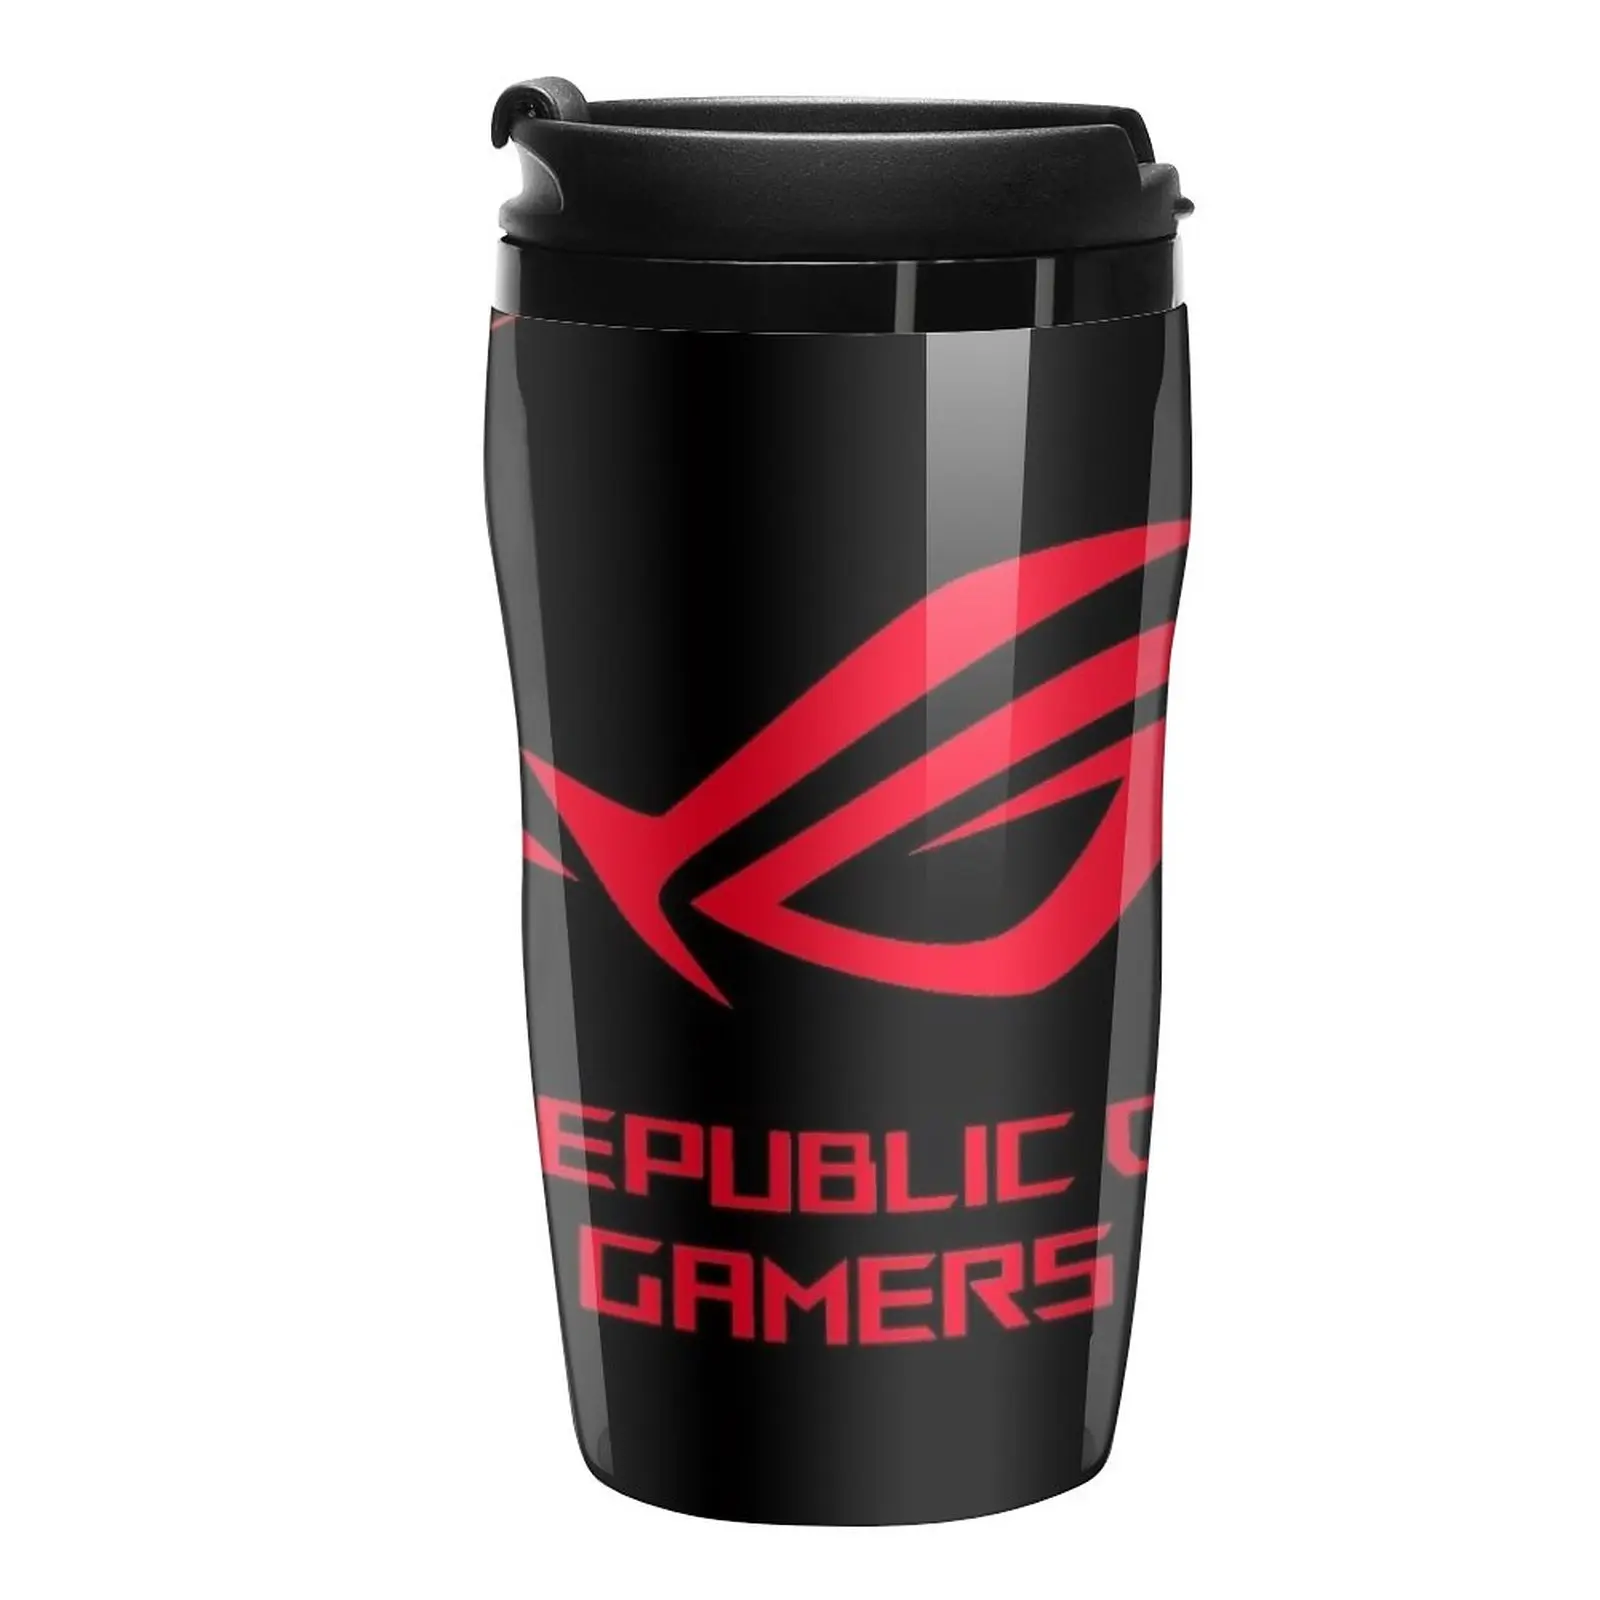 

New Republic of Gamers - Asus Rog Strix Logotipe Travel Coffee Mug Latte Cup Coffe Cups Mate Cup Coffee Cups Sets